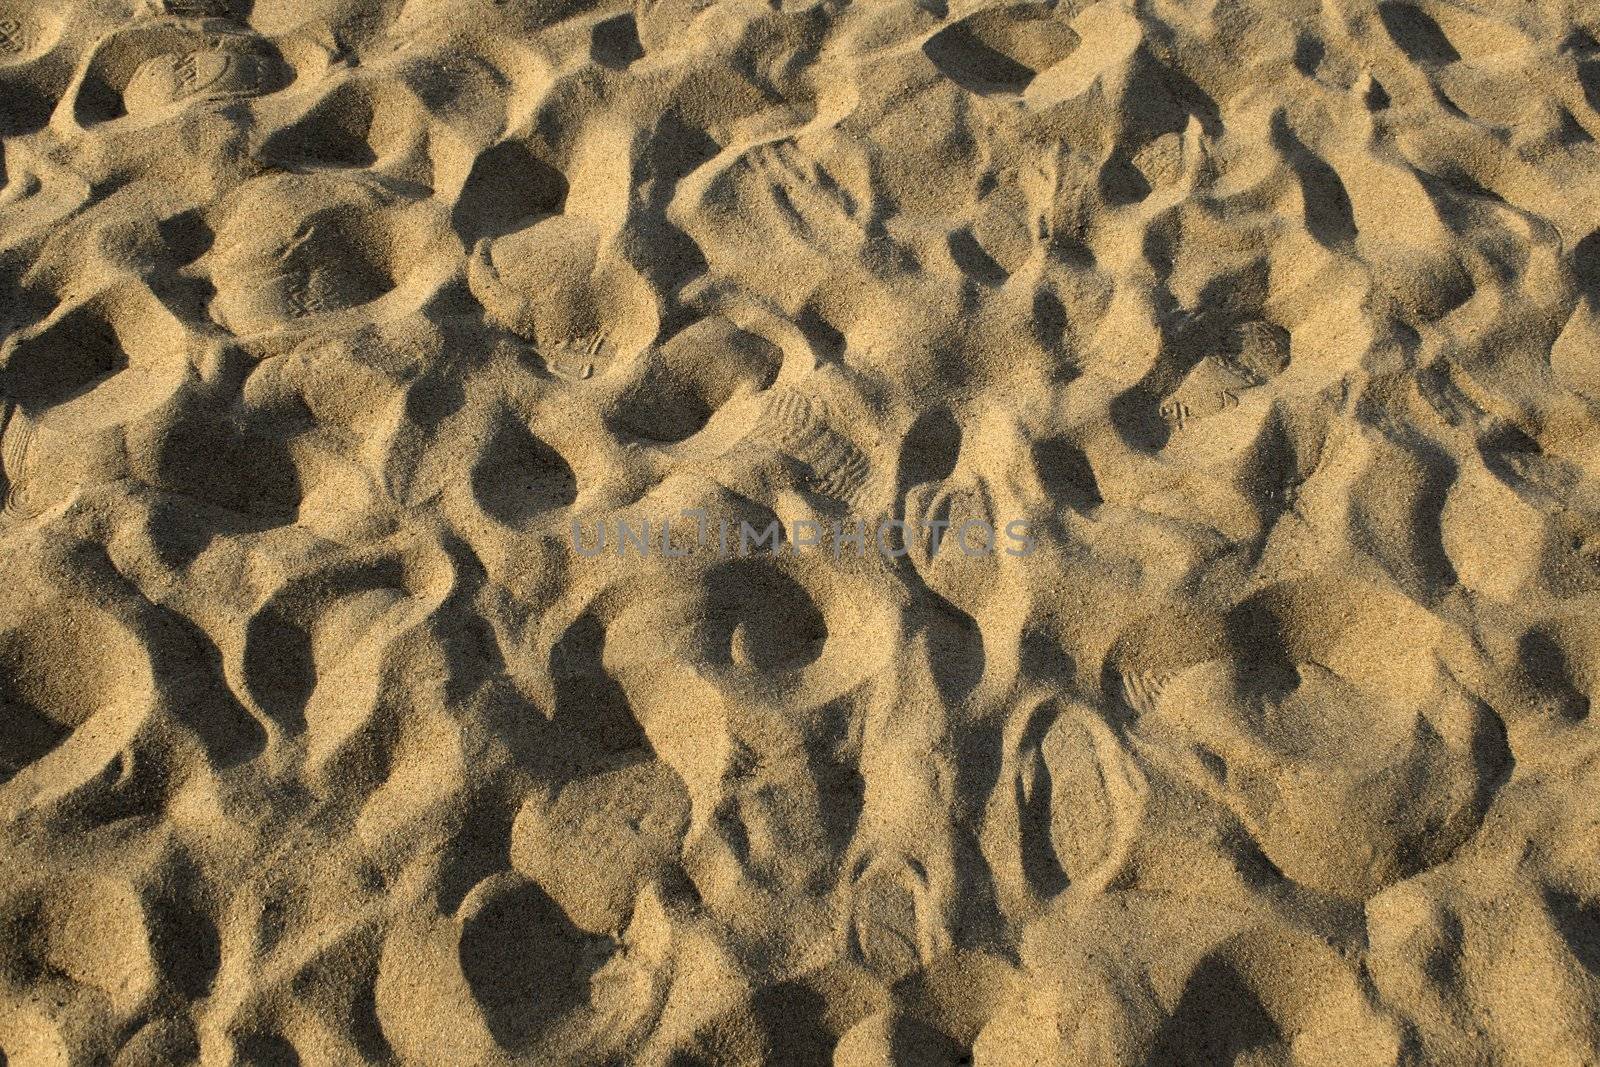 Footprints in the sand by anikasalsera